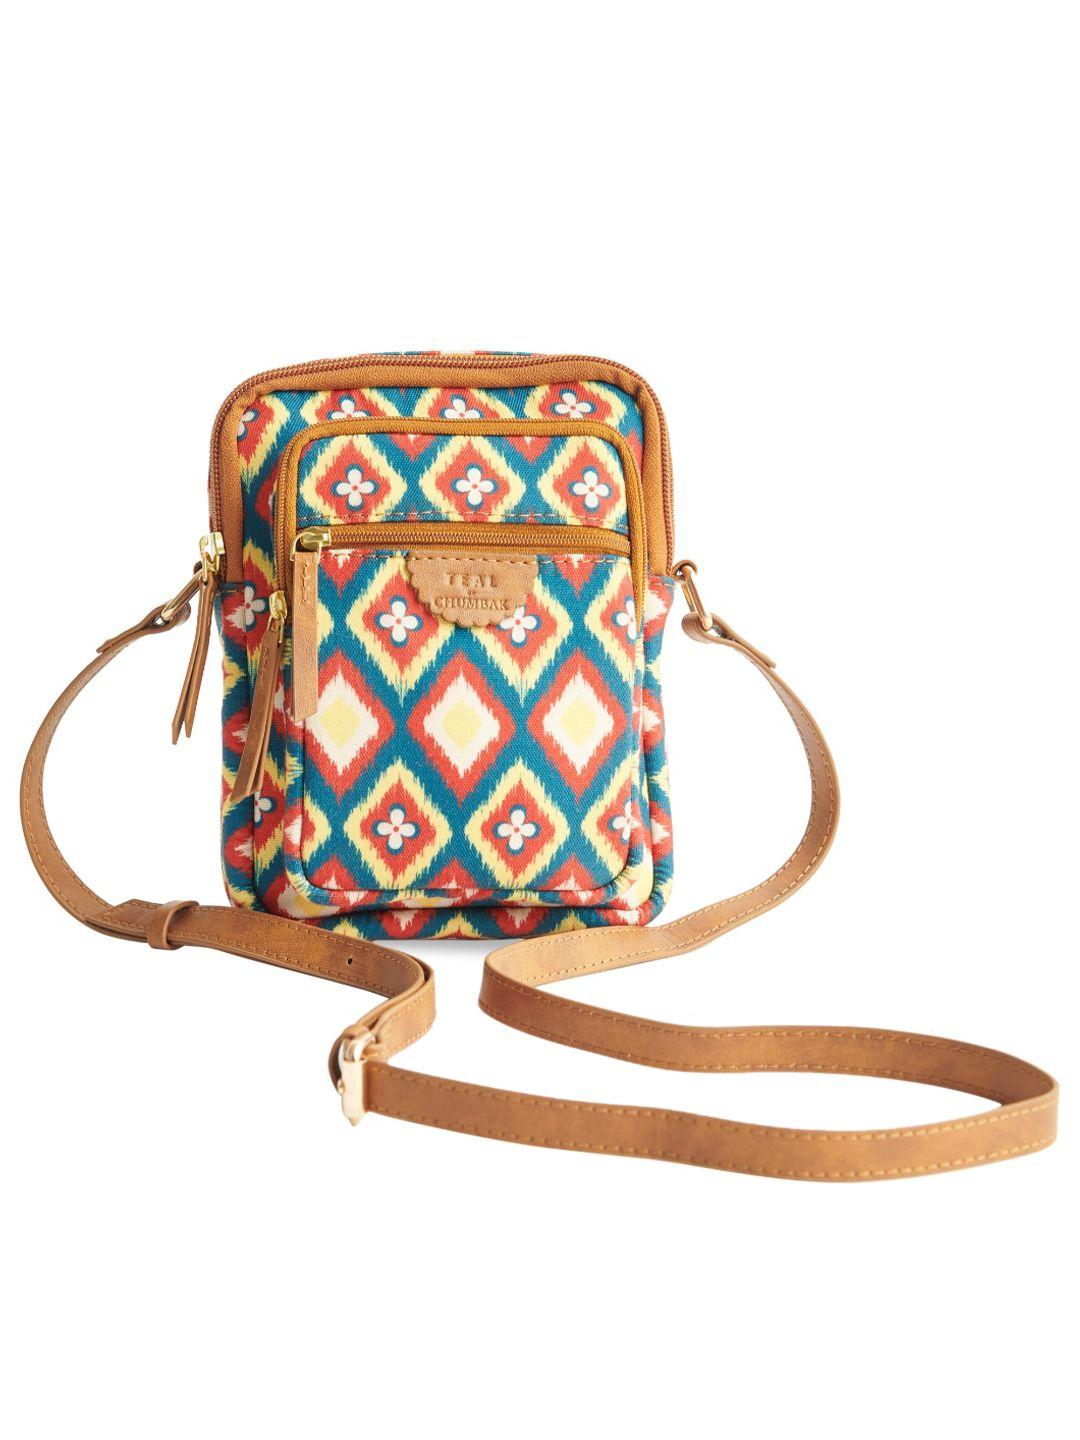 teal by chumbak women printed structured sling bag